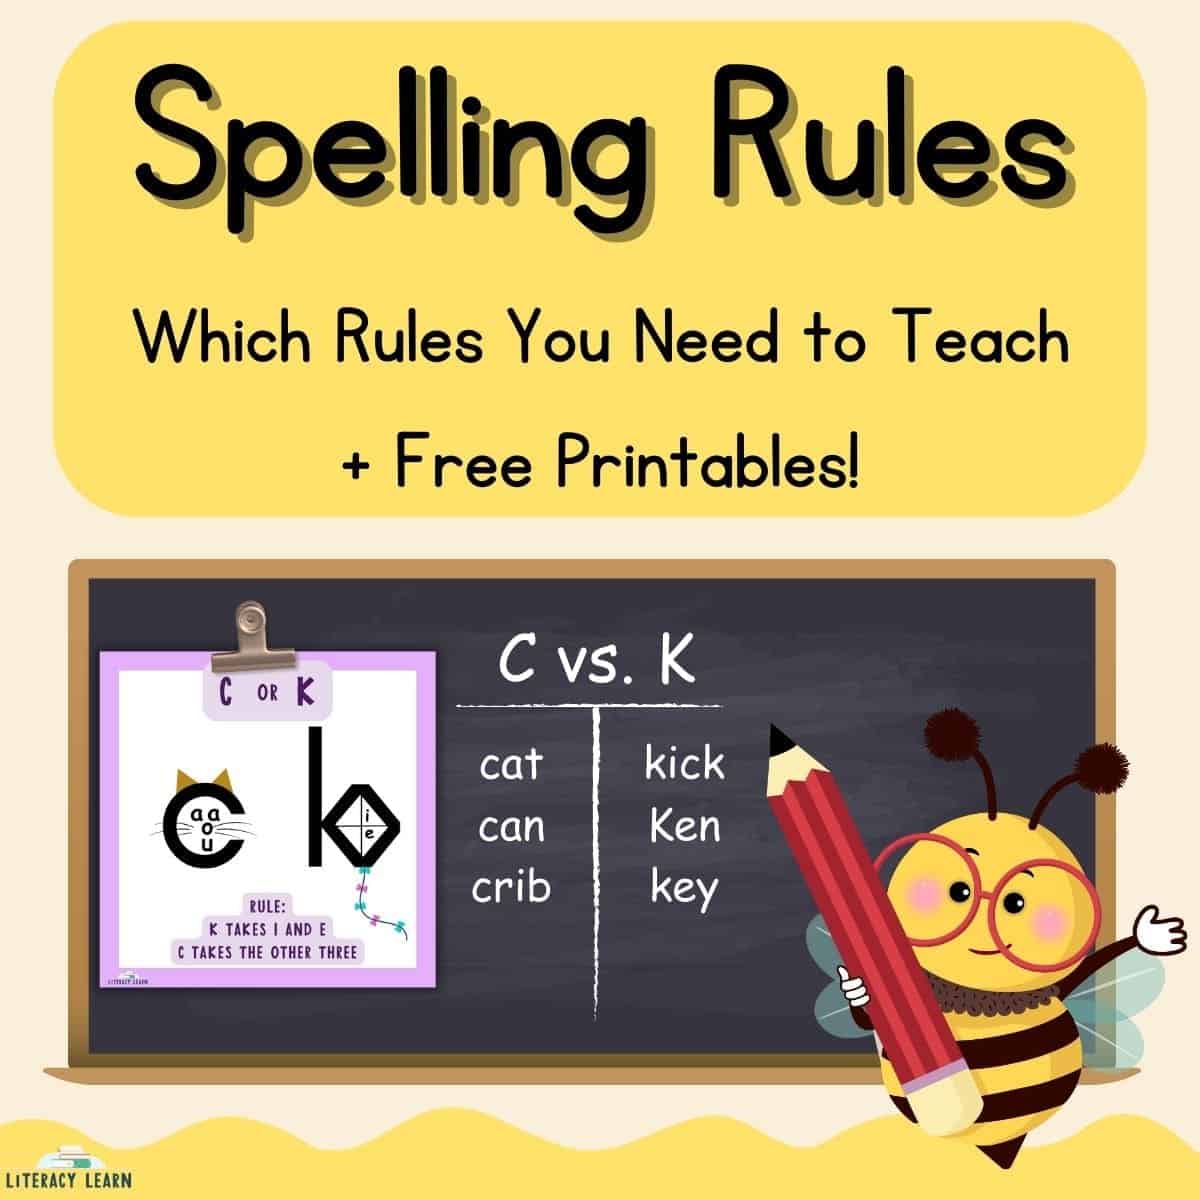 Yellow graphic with title "Spelling Rules"  with bumble bee graphic pointing to a chalkboard.